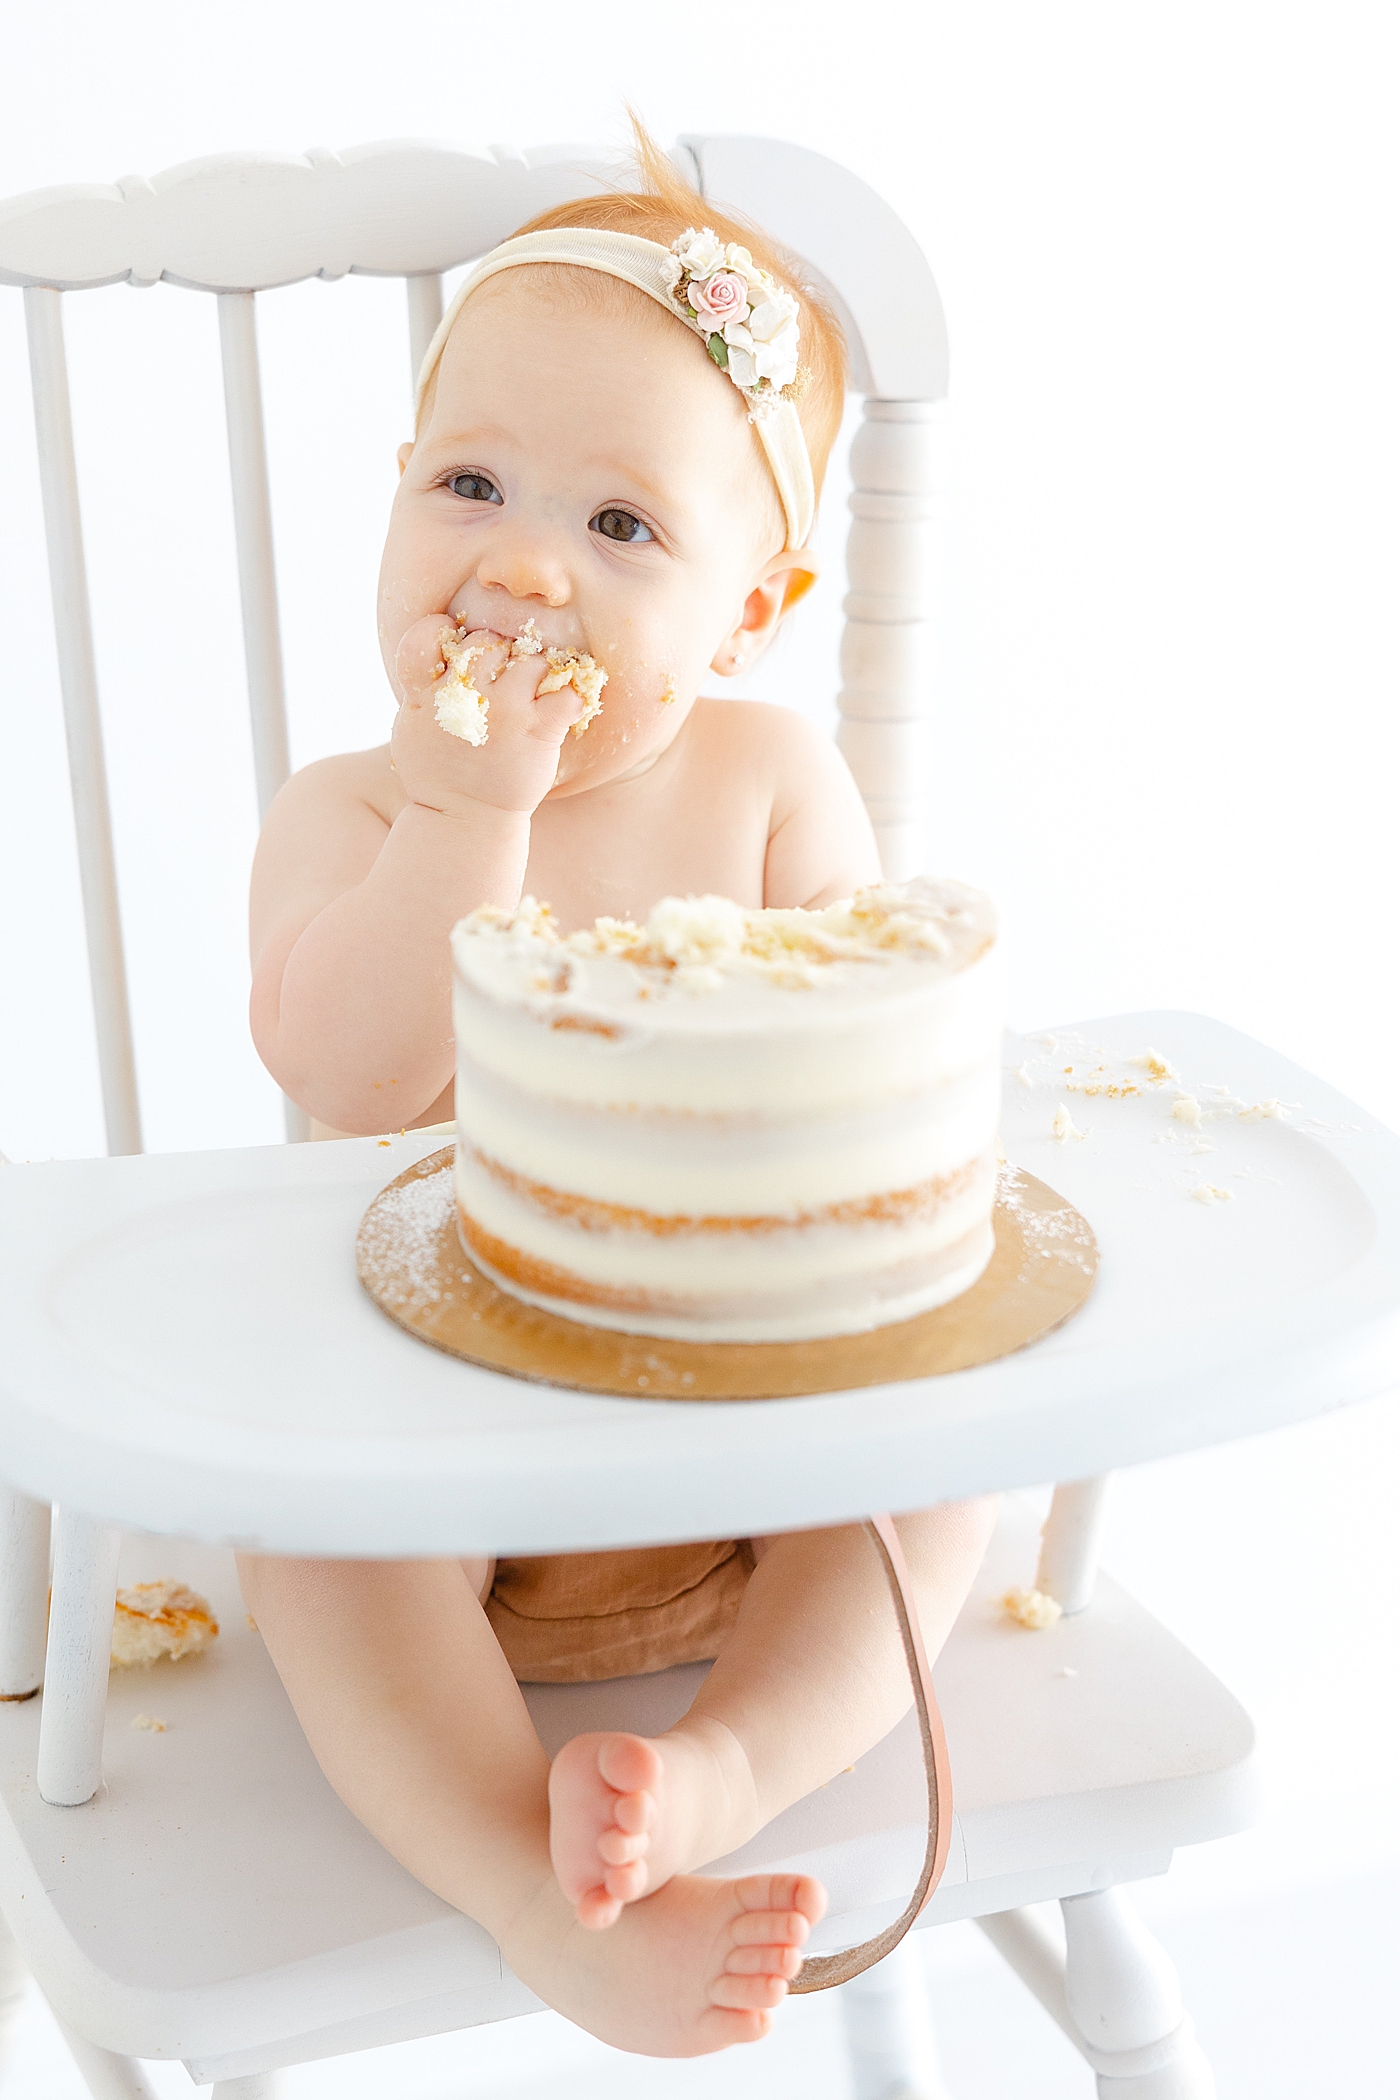 Baby girl eating her smash cake in a white highchair | Image by Sana Ahmed Photography